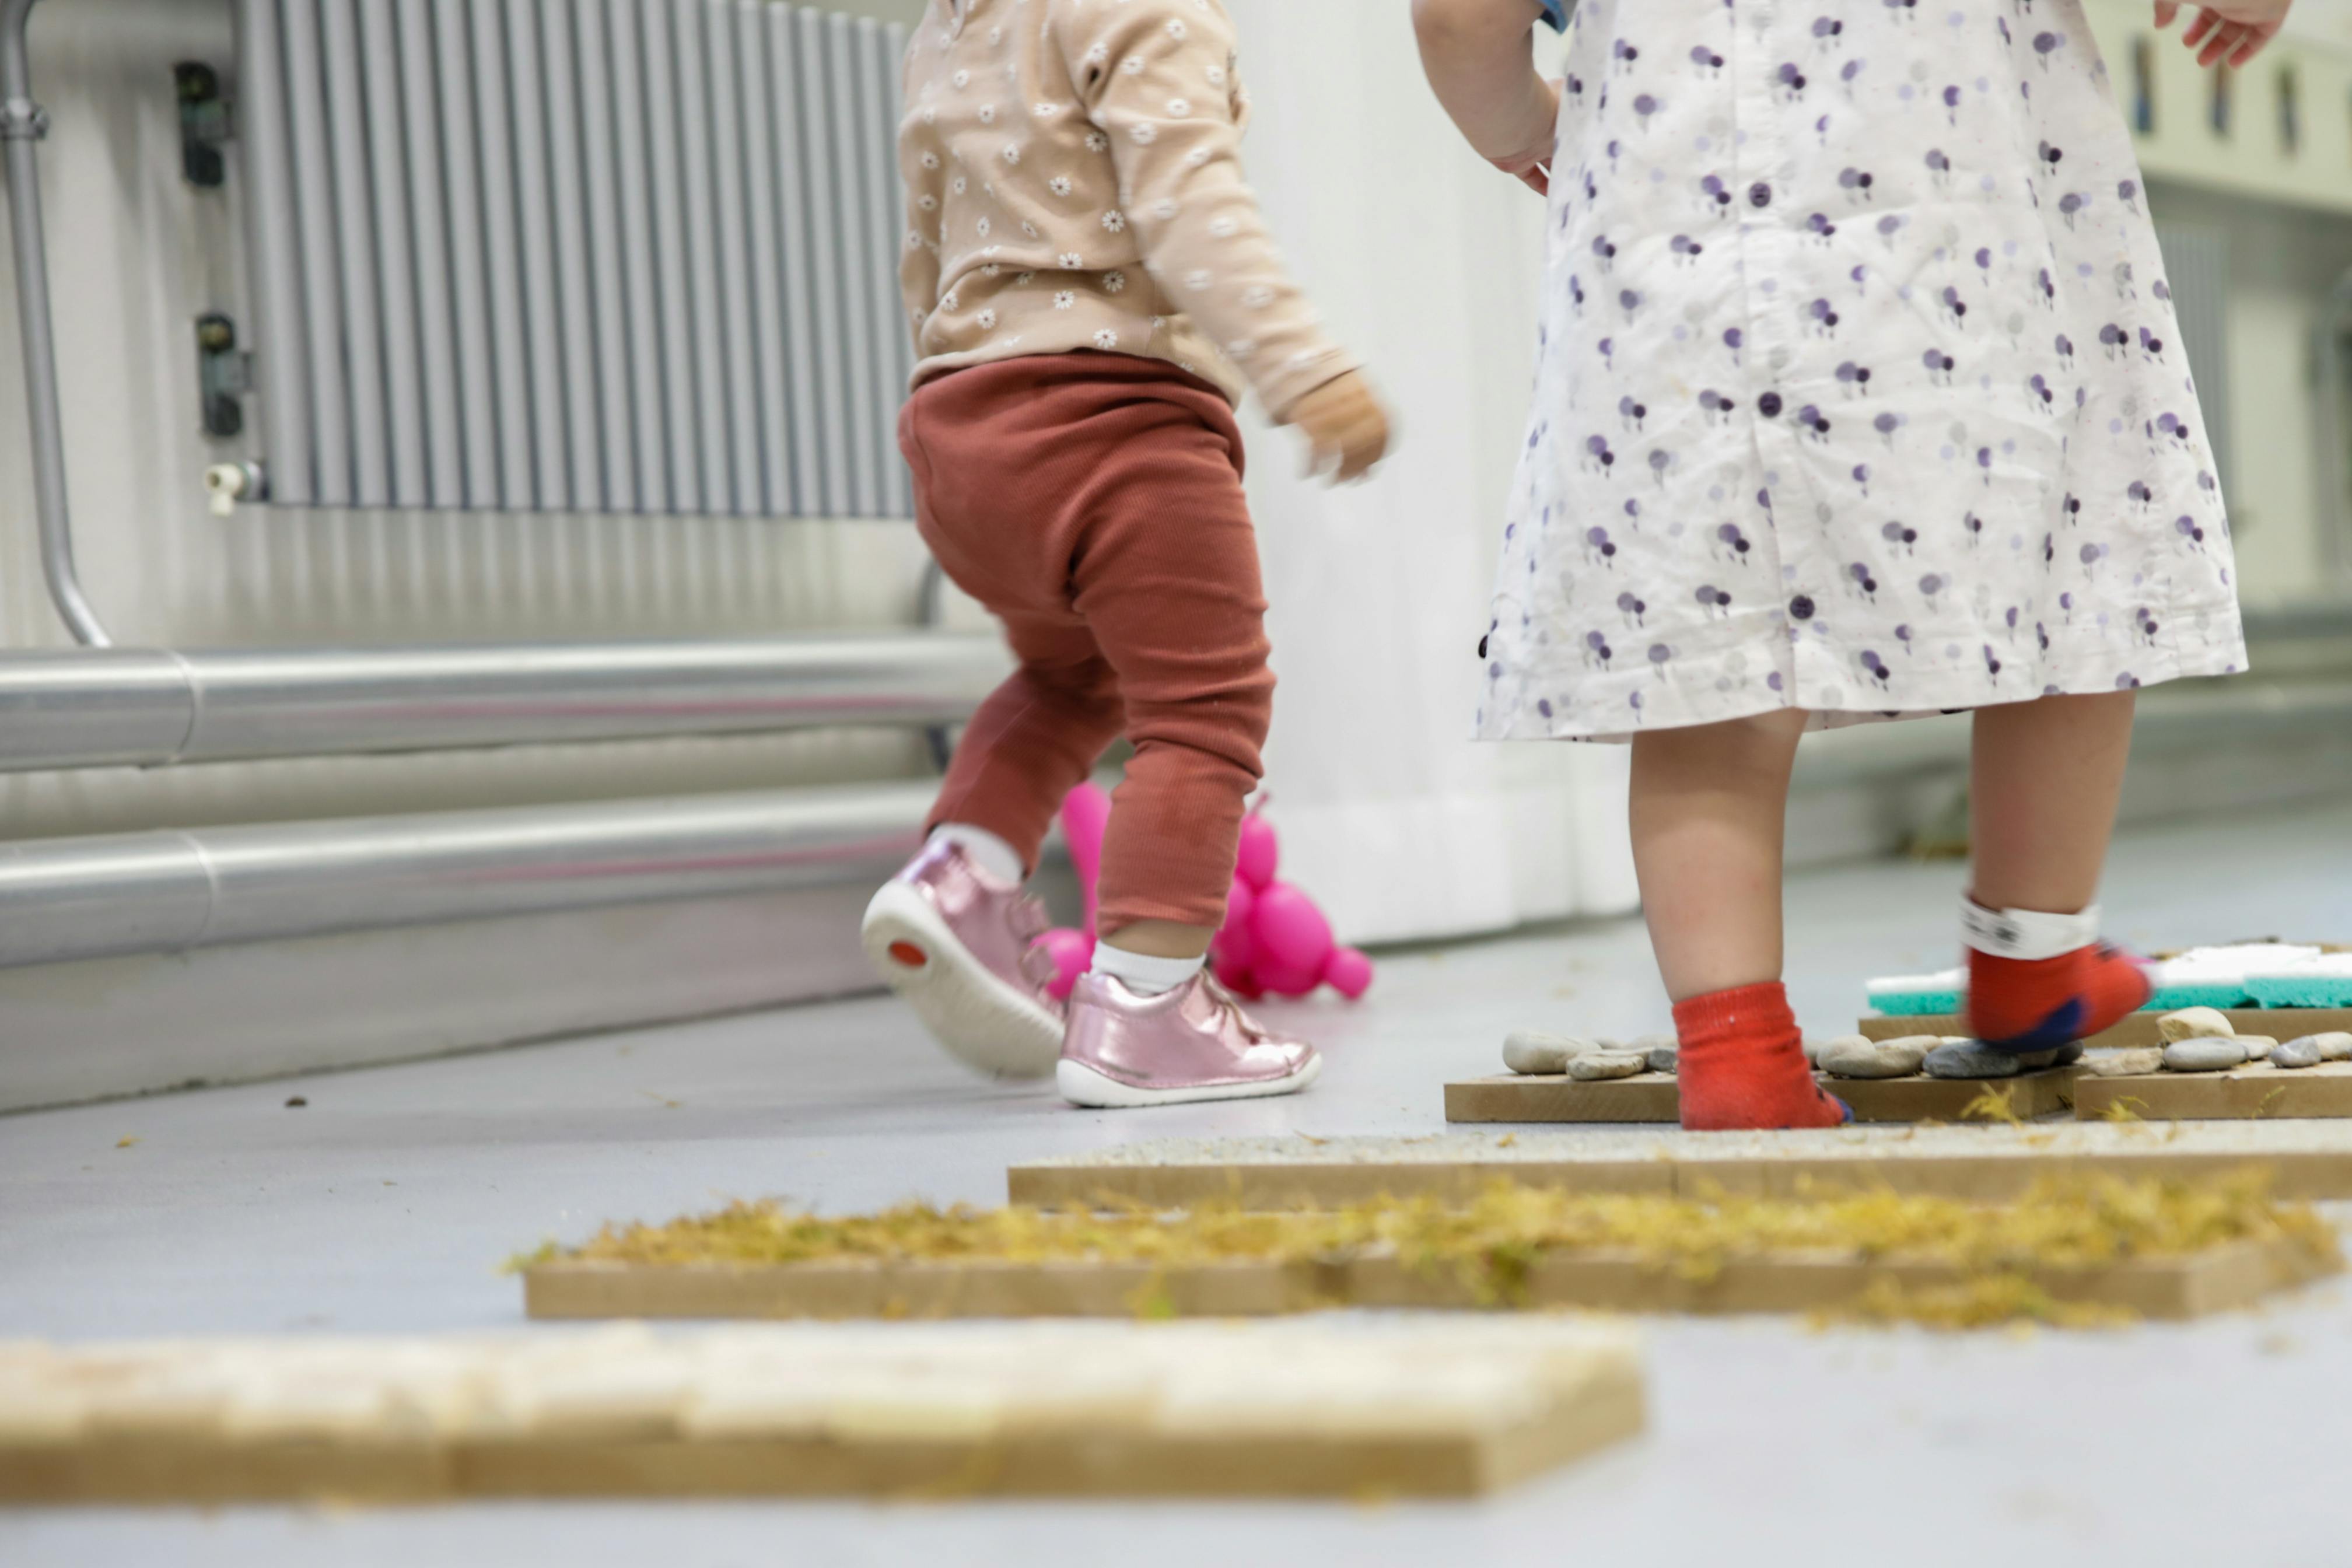 A pair of children walking on a sensory path